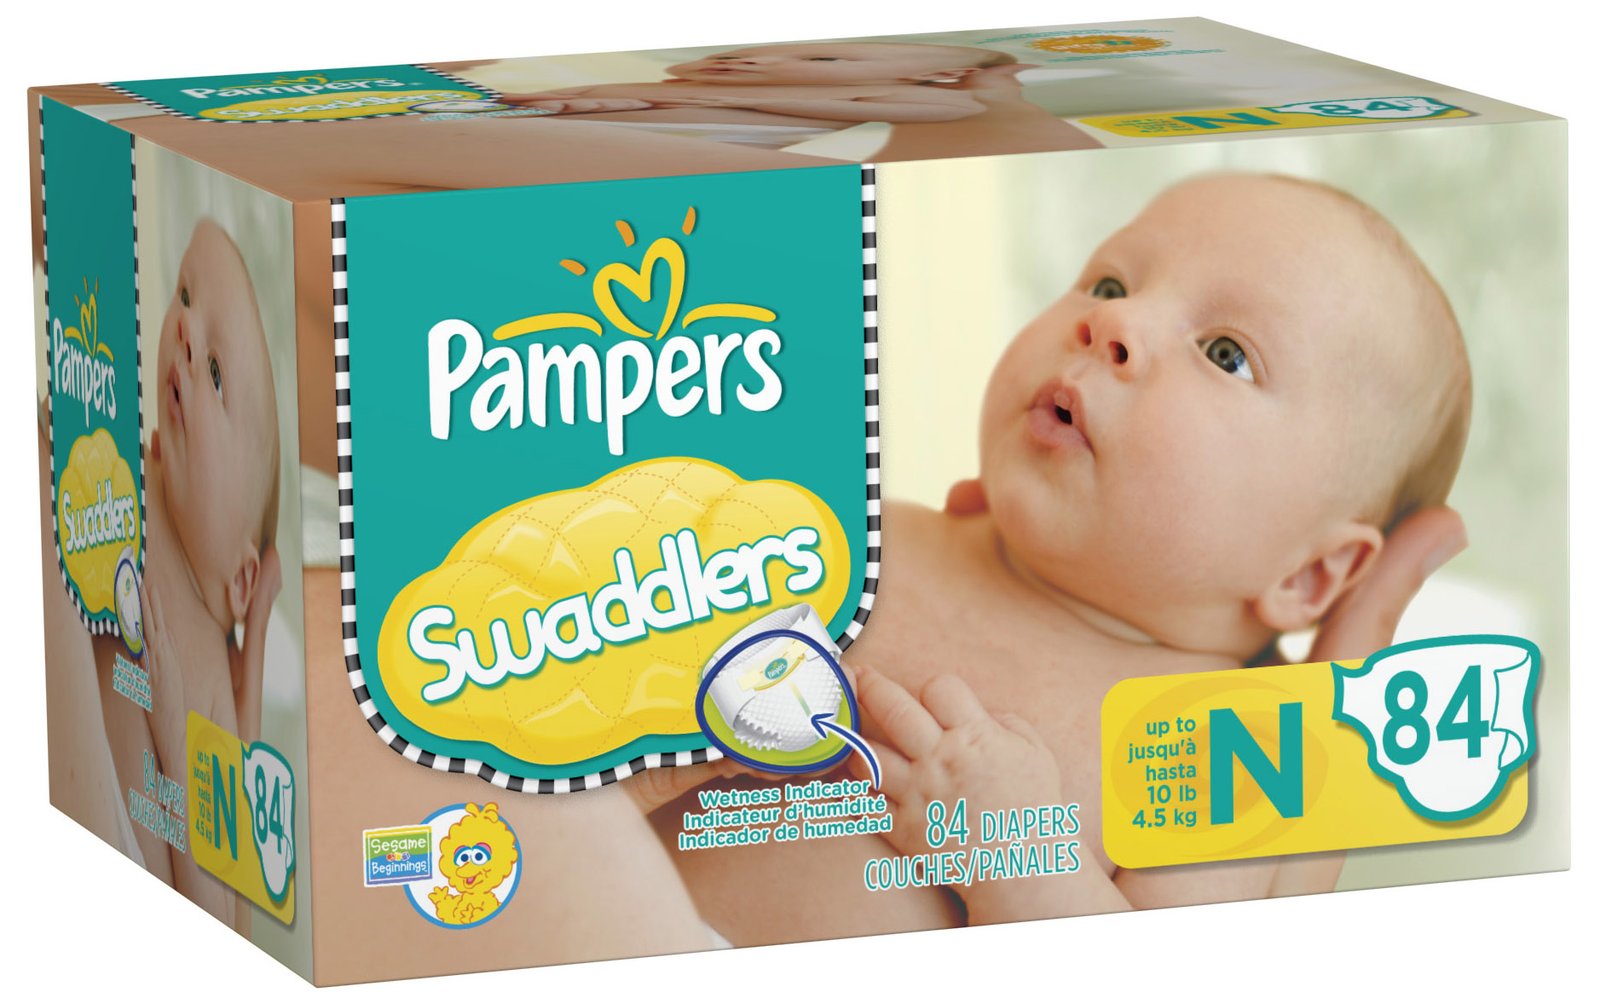 We Love these Pampers in the McGee house!